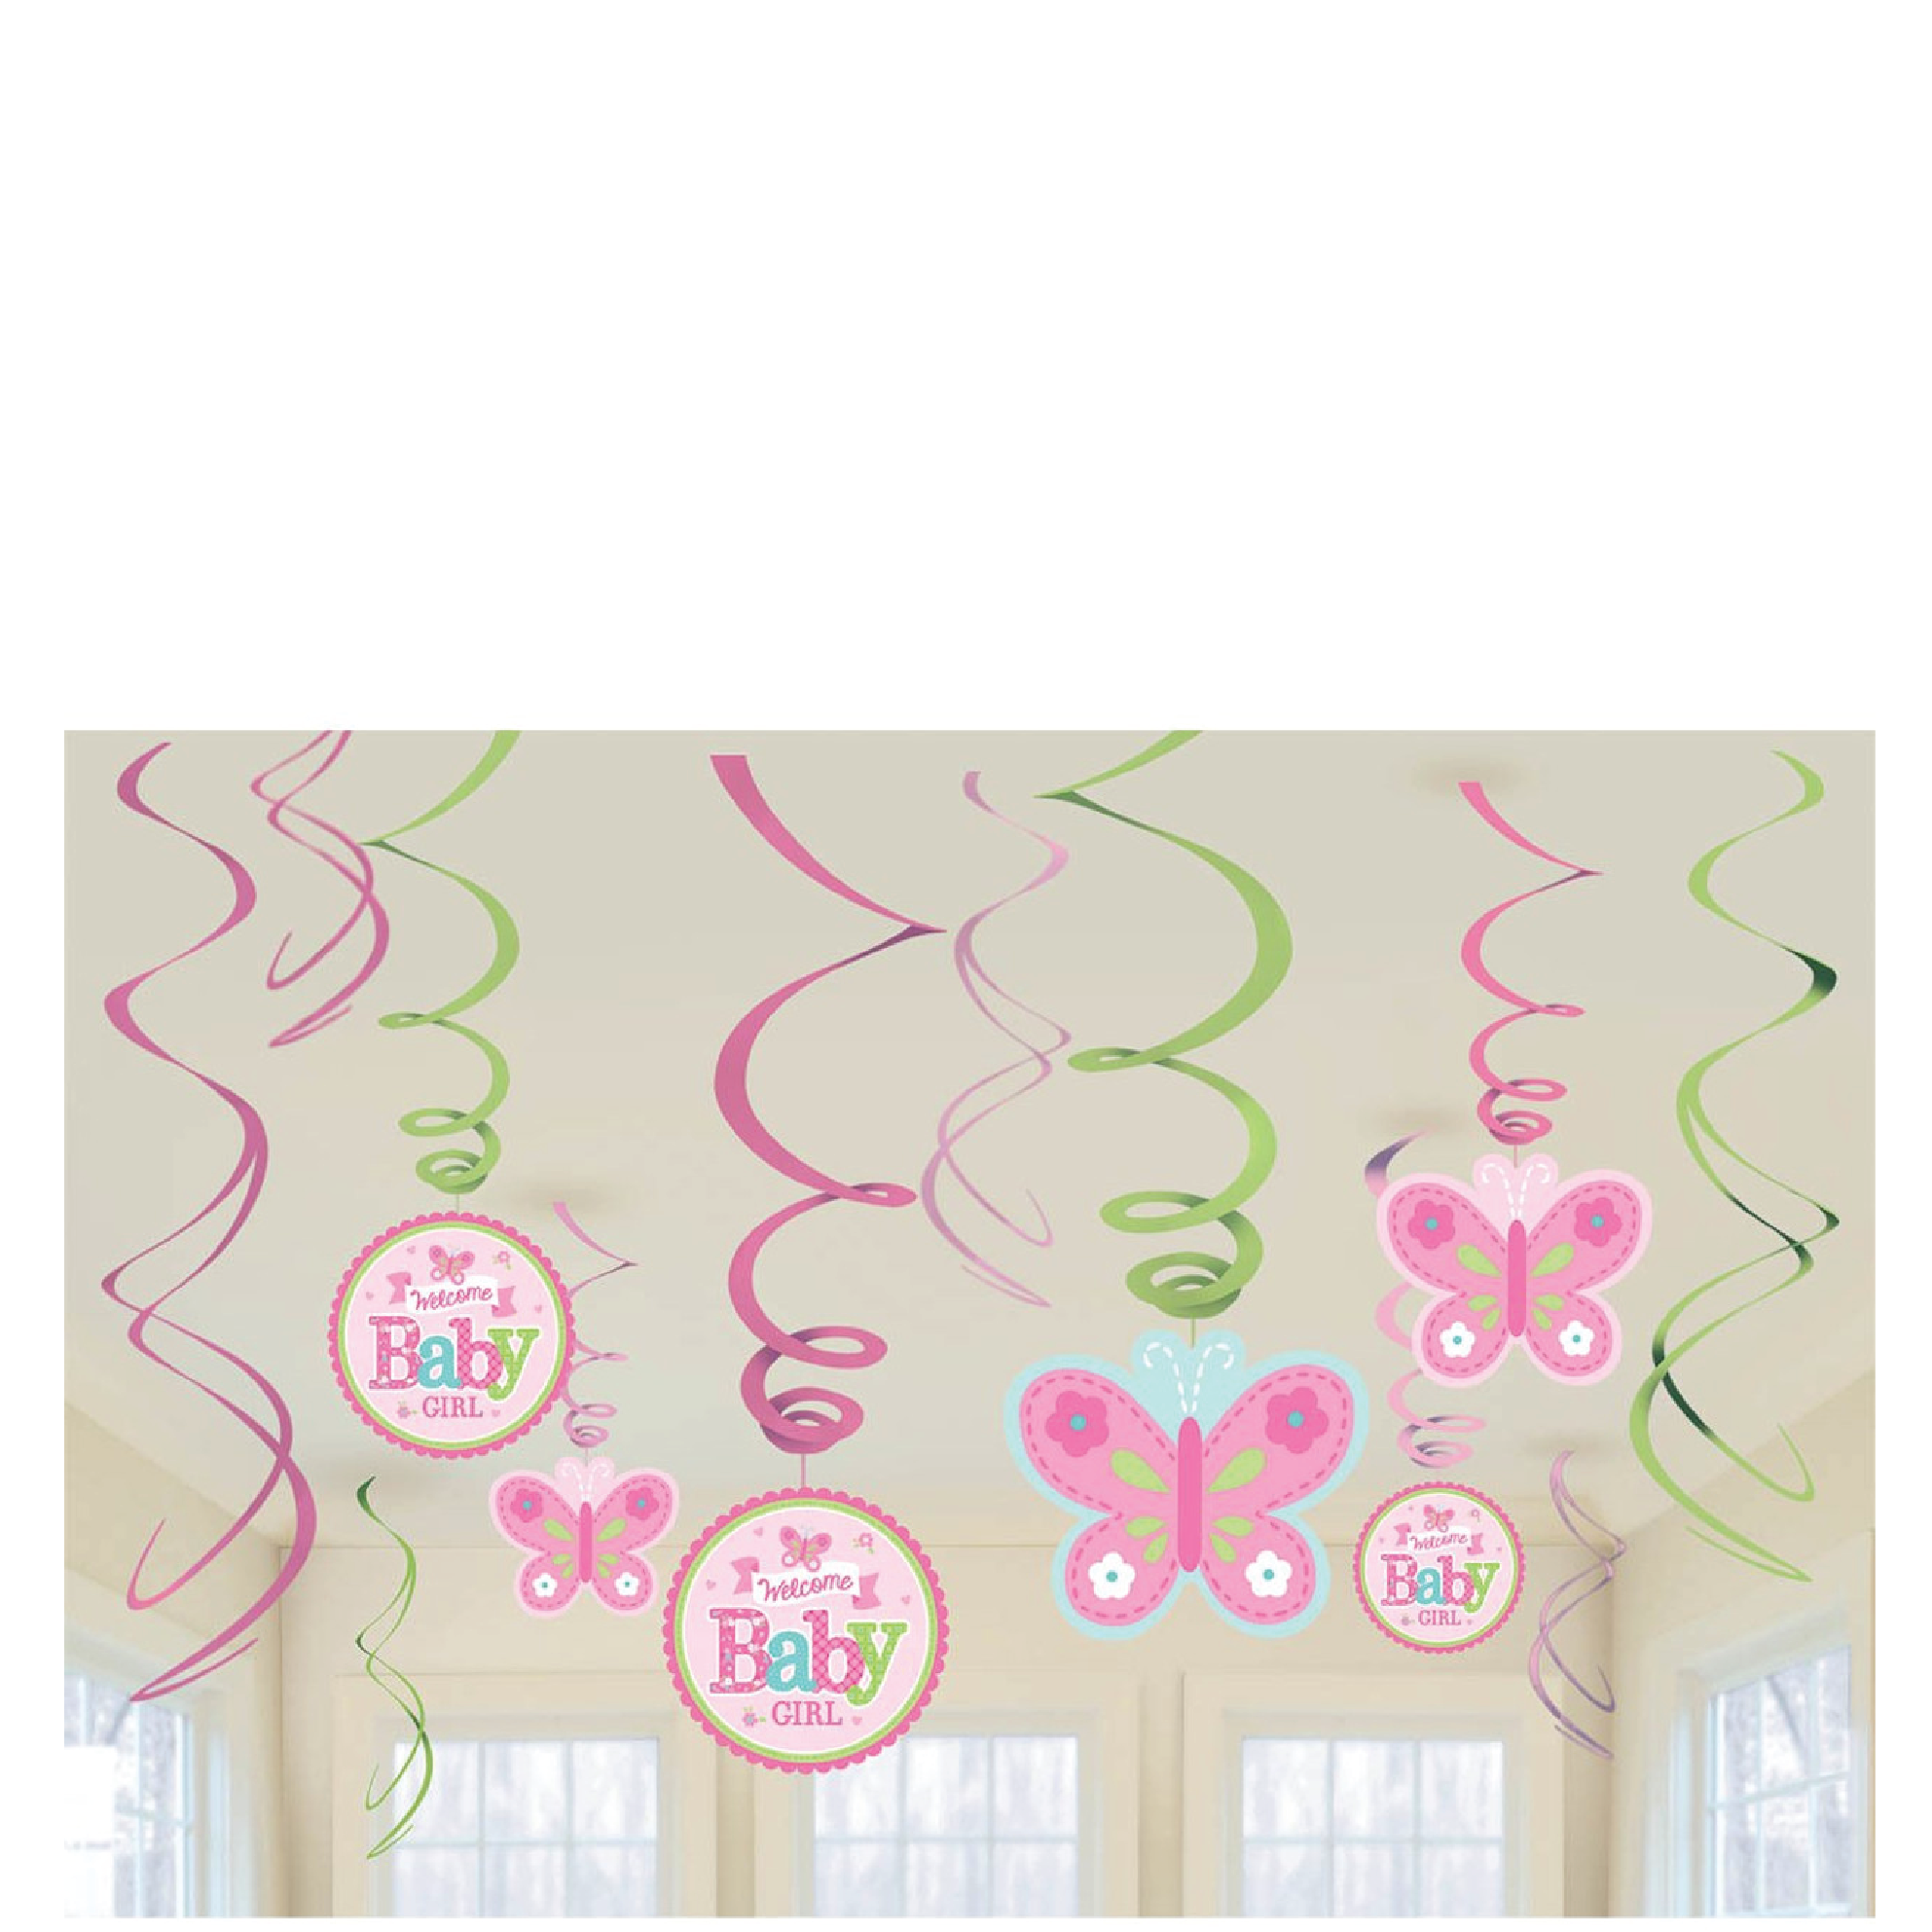 Welcome Little One Girl Butterfly Swirls Decorations 12 st